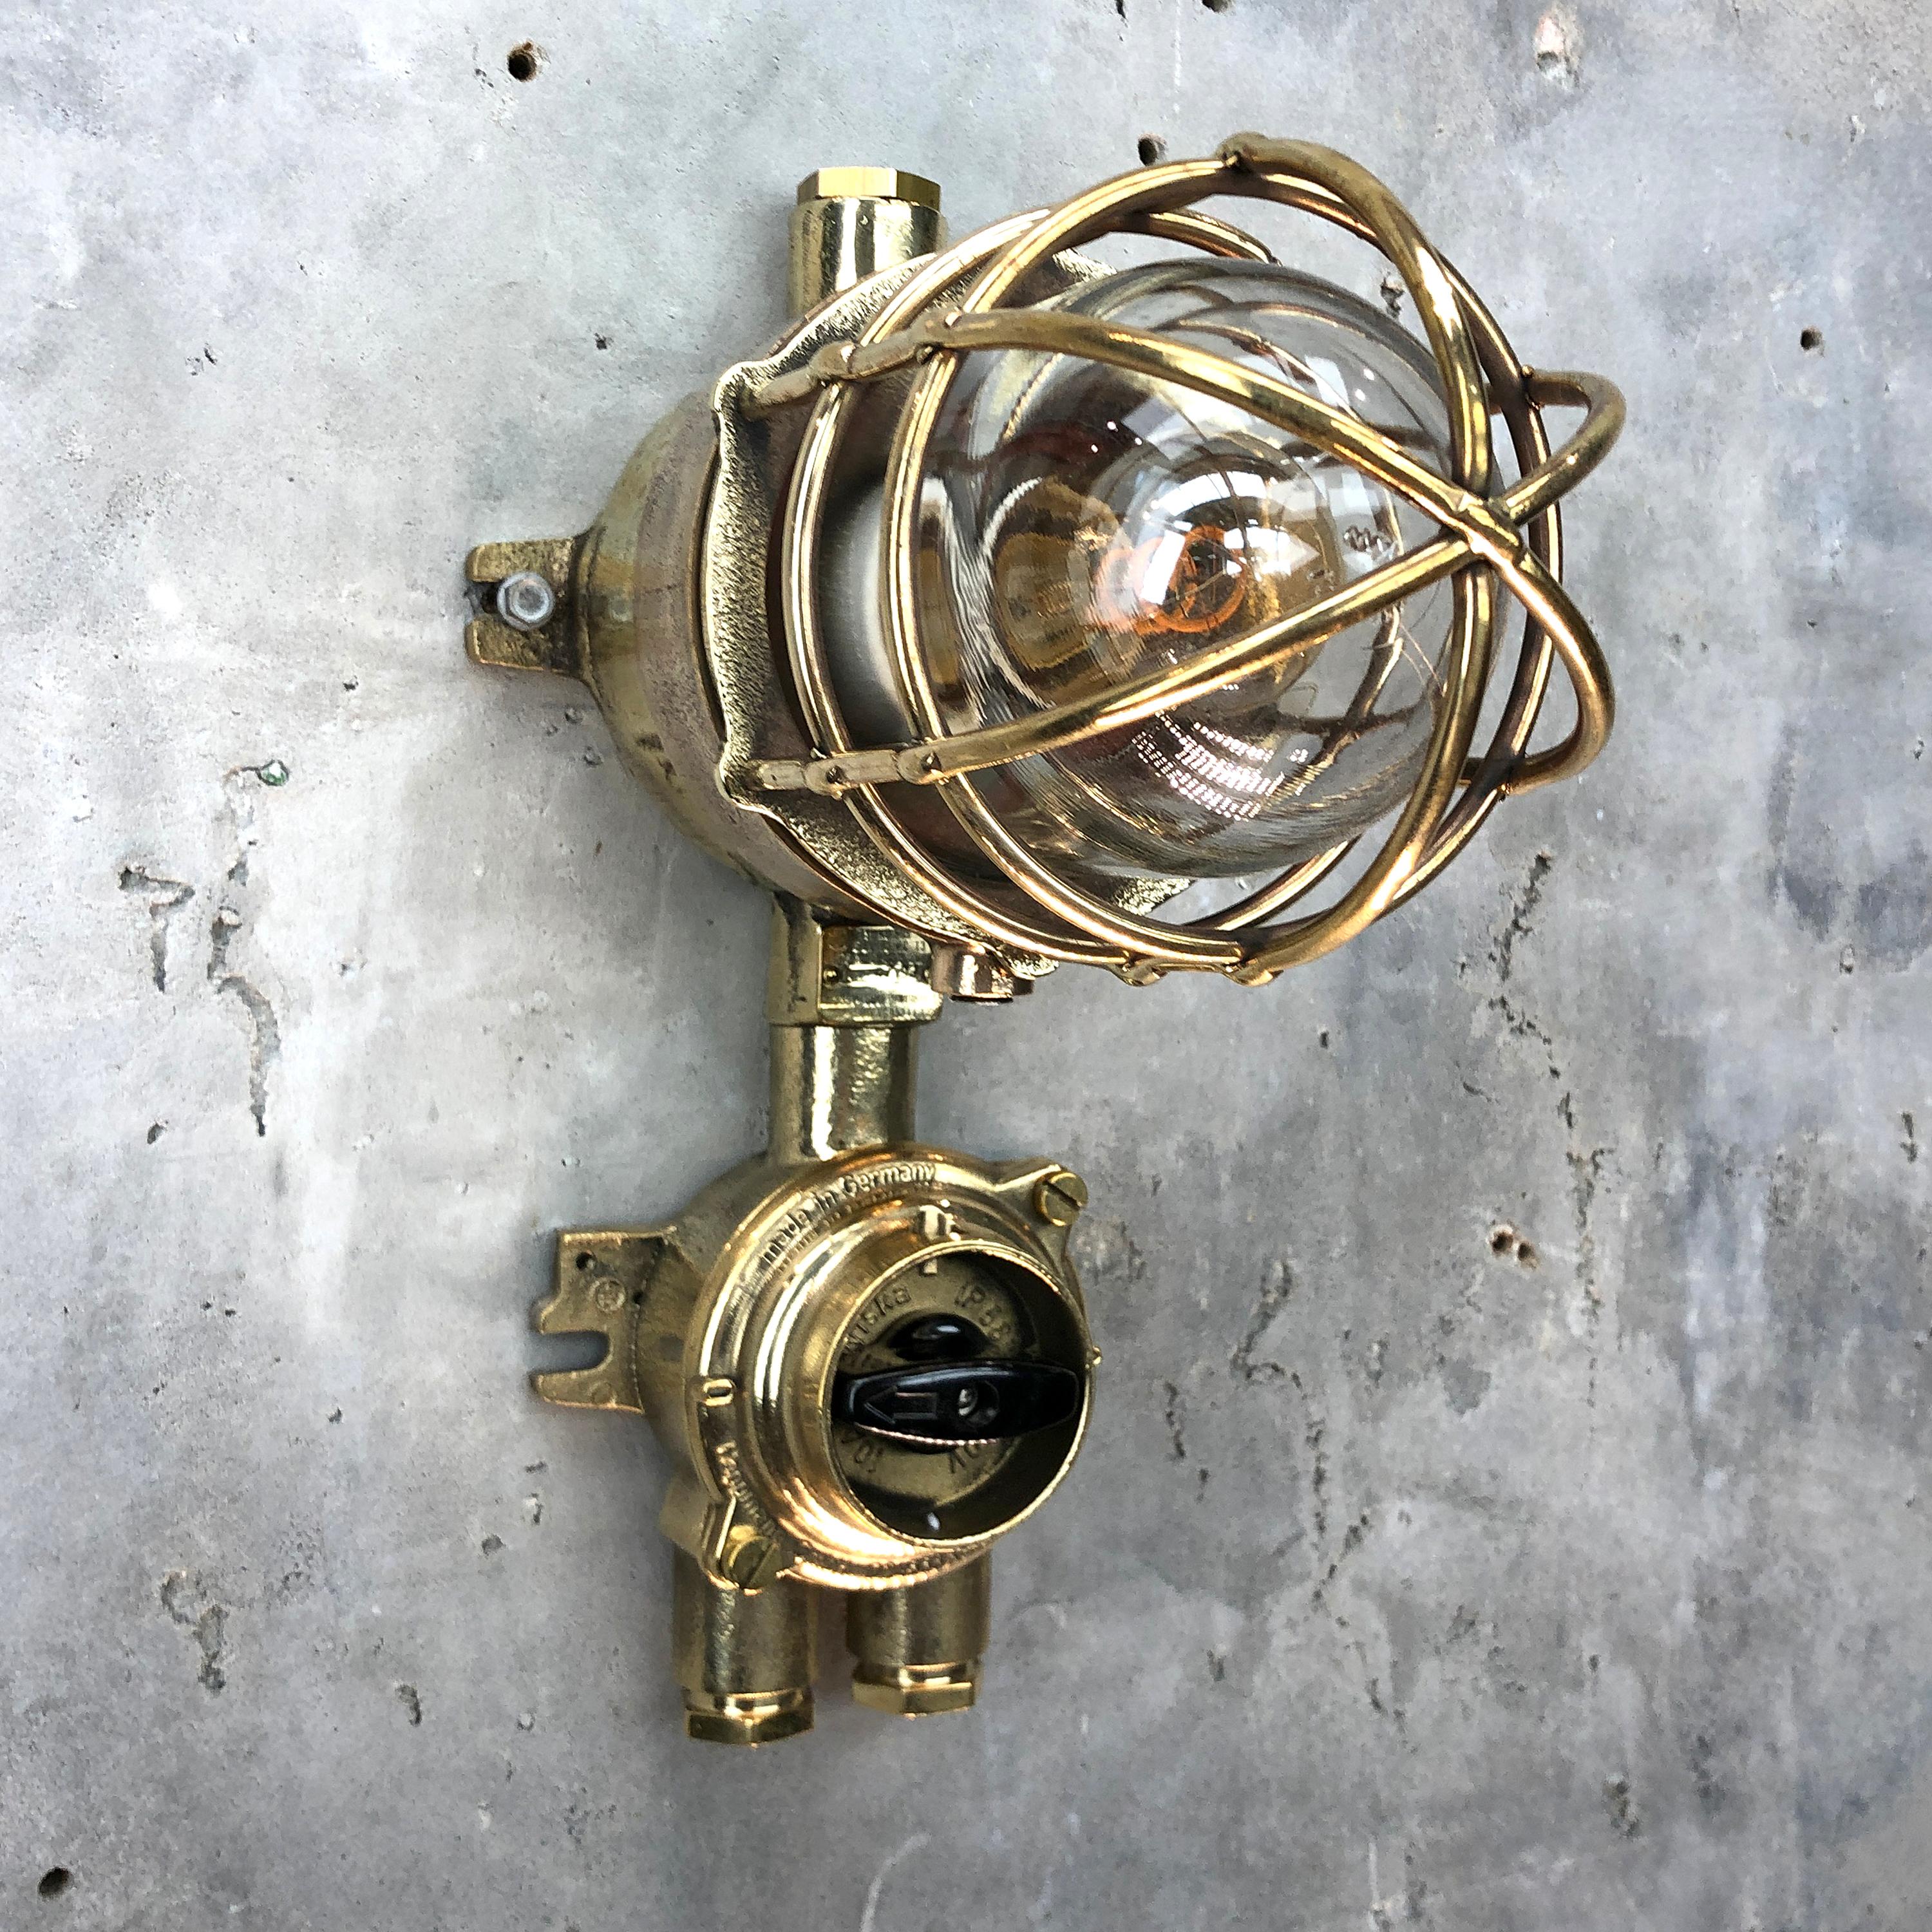 A vintage Industrial solid cast bronze and brass explosion proof pendant manufactured circa 1975 by Wiska and Centurion who are manufacturers of Ex. (explosion proof) rated fixtures. 

The lamp comes fitted with a cast brass Wiska isolator